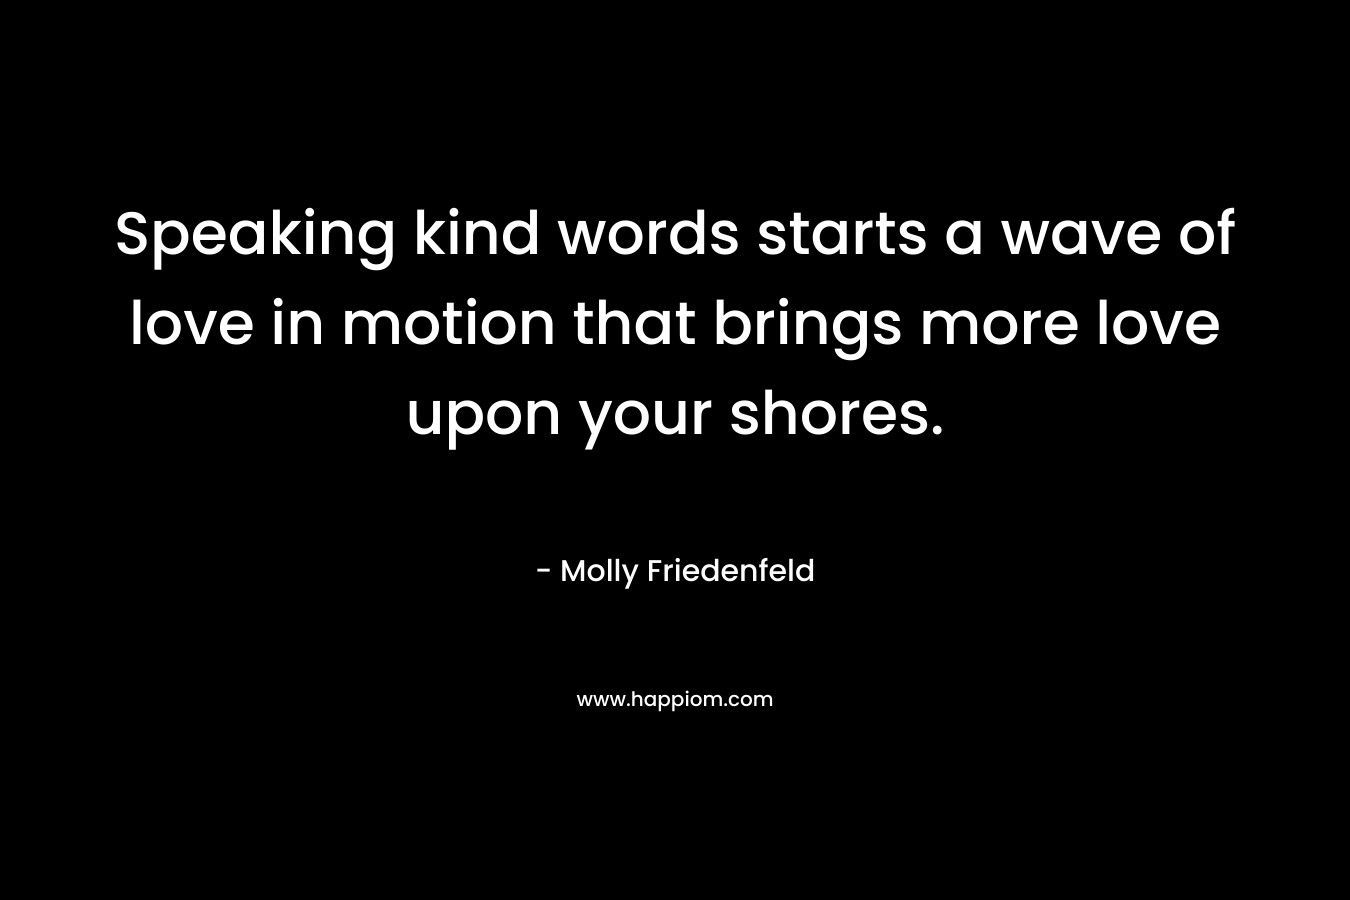 Speaking kind words starts a wave of love in motion that brings more love upon your shores.